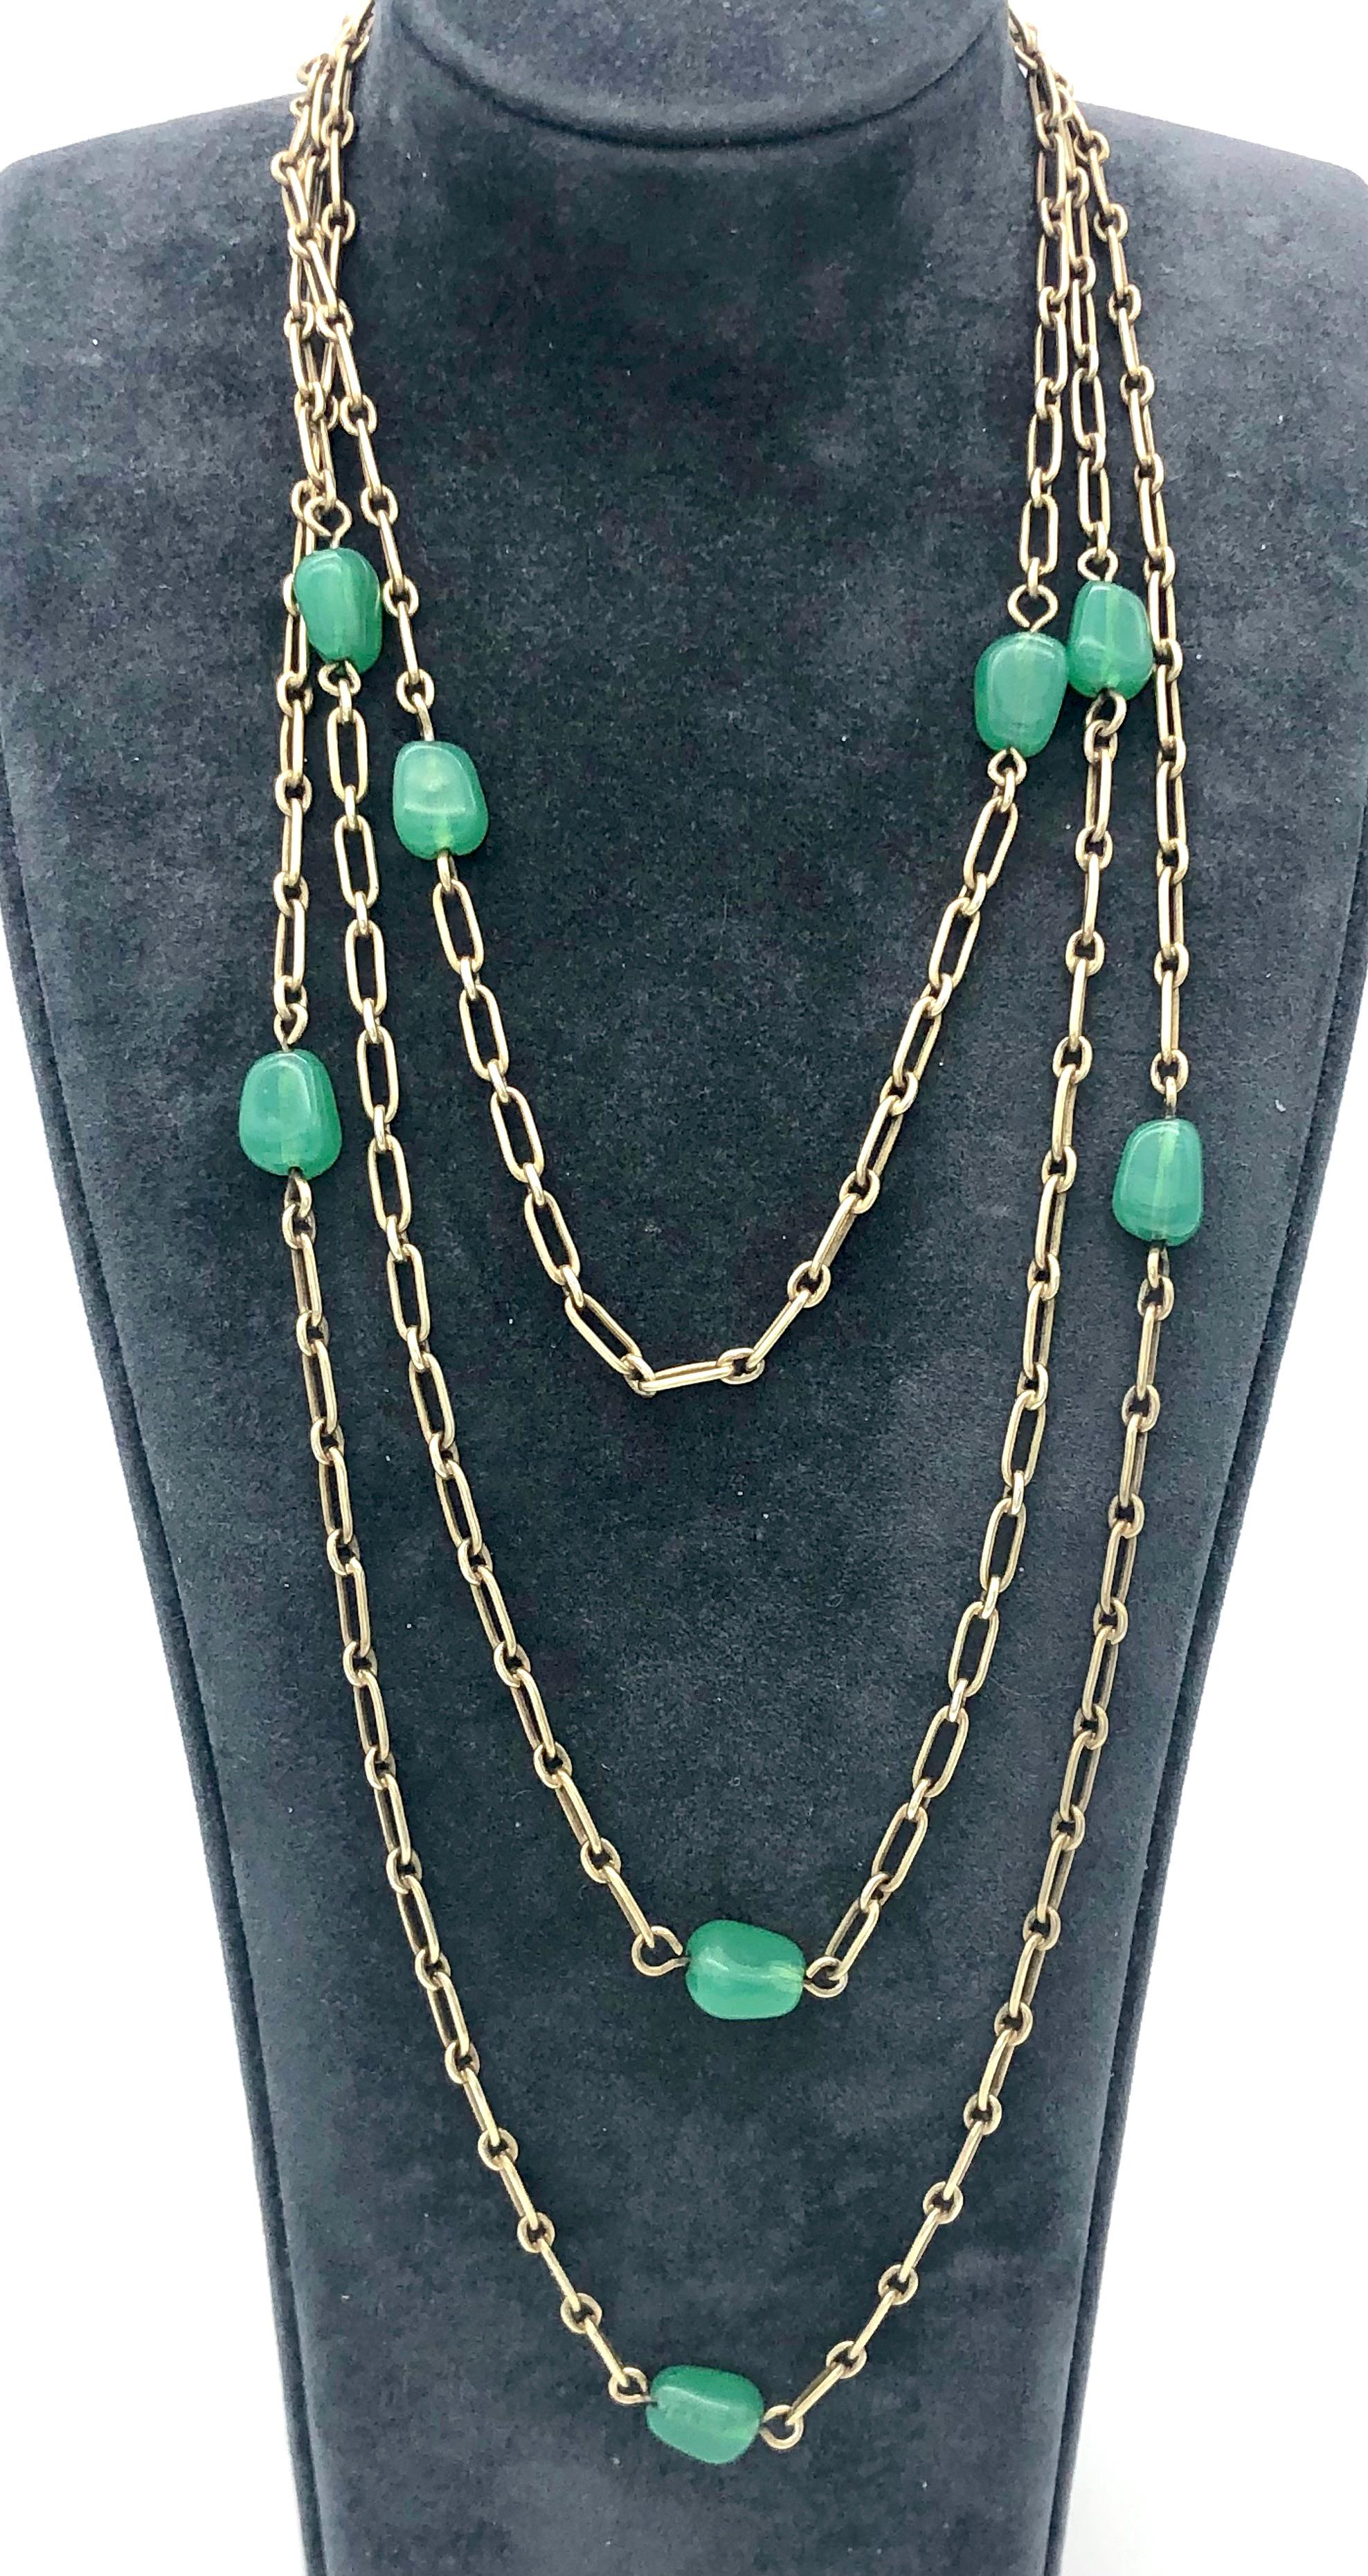 This elegant long guard chain is made was crerated towards the end of the 19th century. from long narrow oval links joined by smaller  oval links. Ten pebbles made out of chrysoprase are worked into the chain.